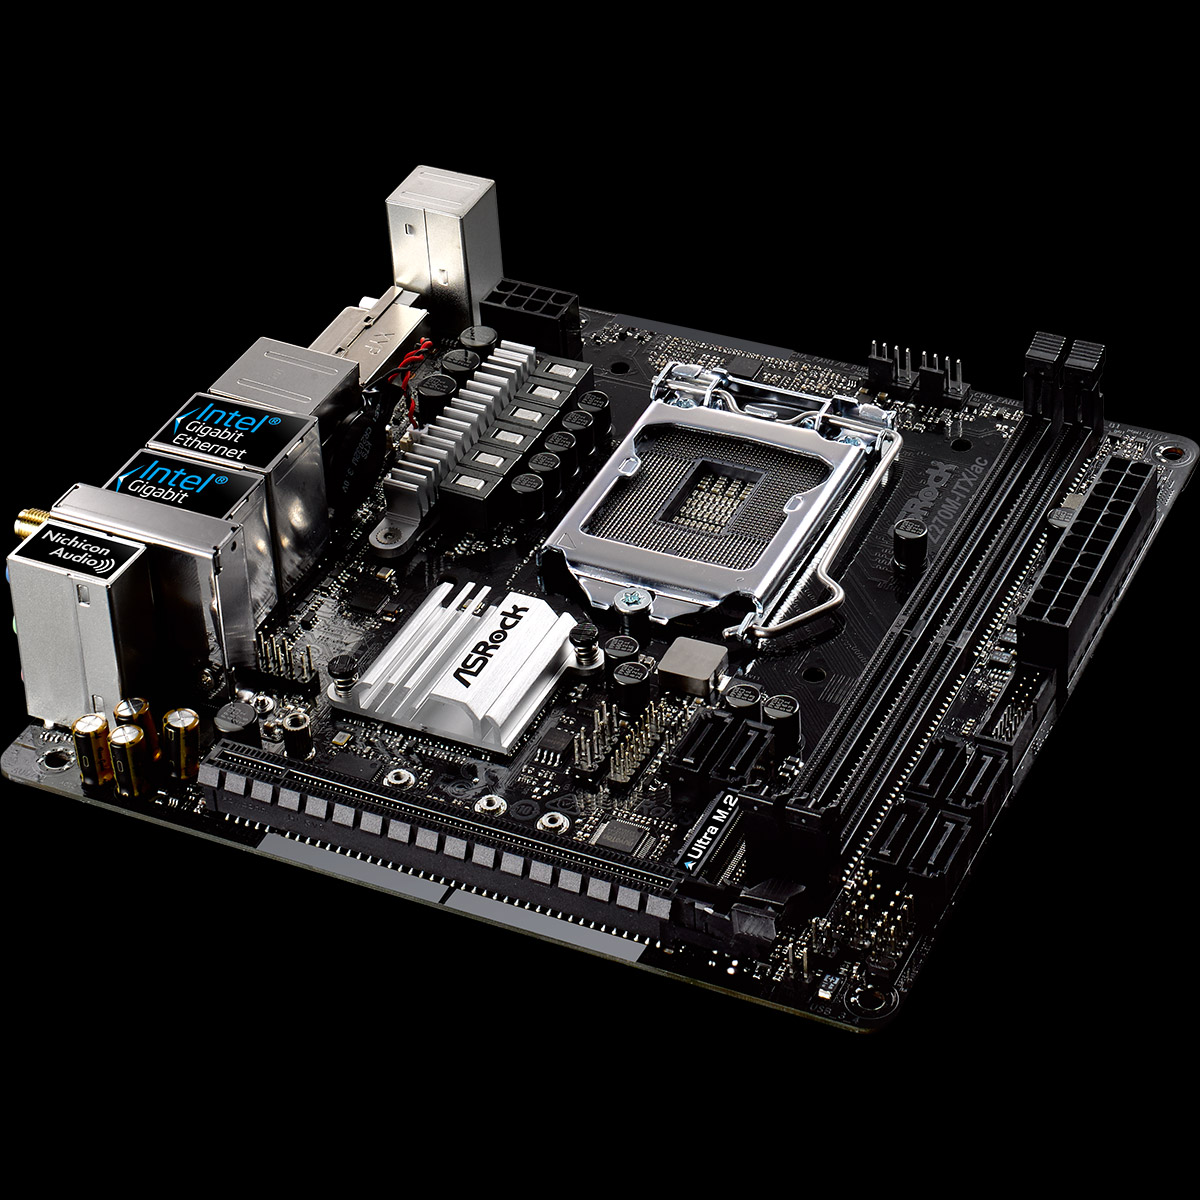 Asrock Z270M-ITX/ac - Motherboard Specifications On MotherboardDB